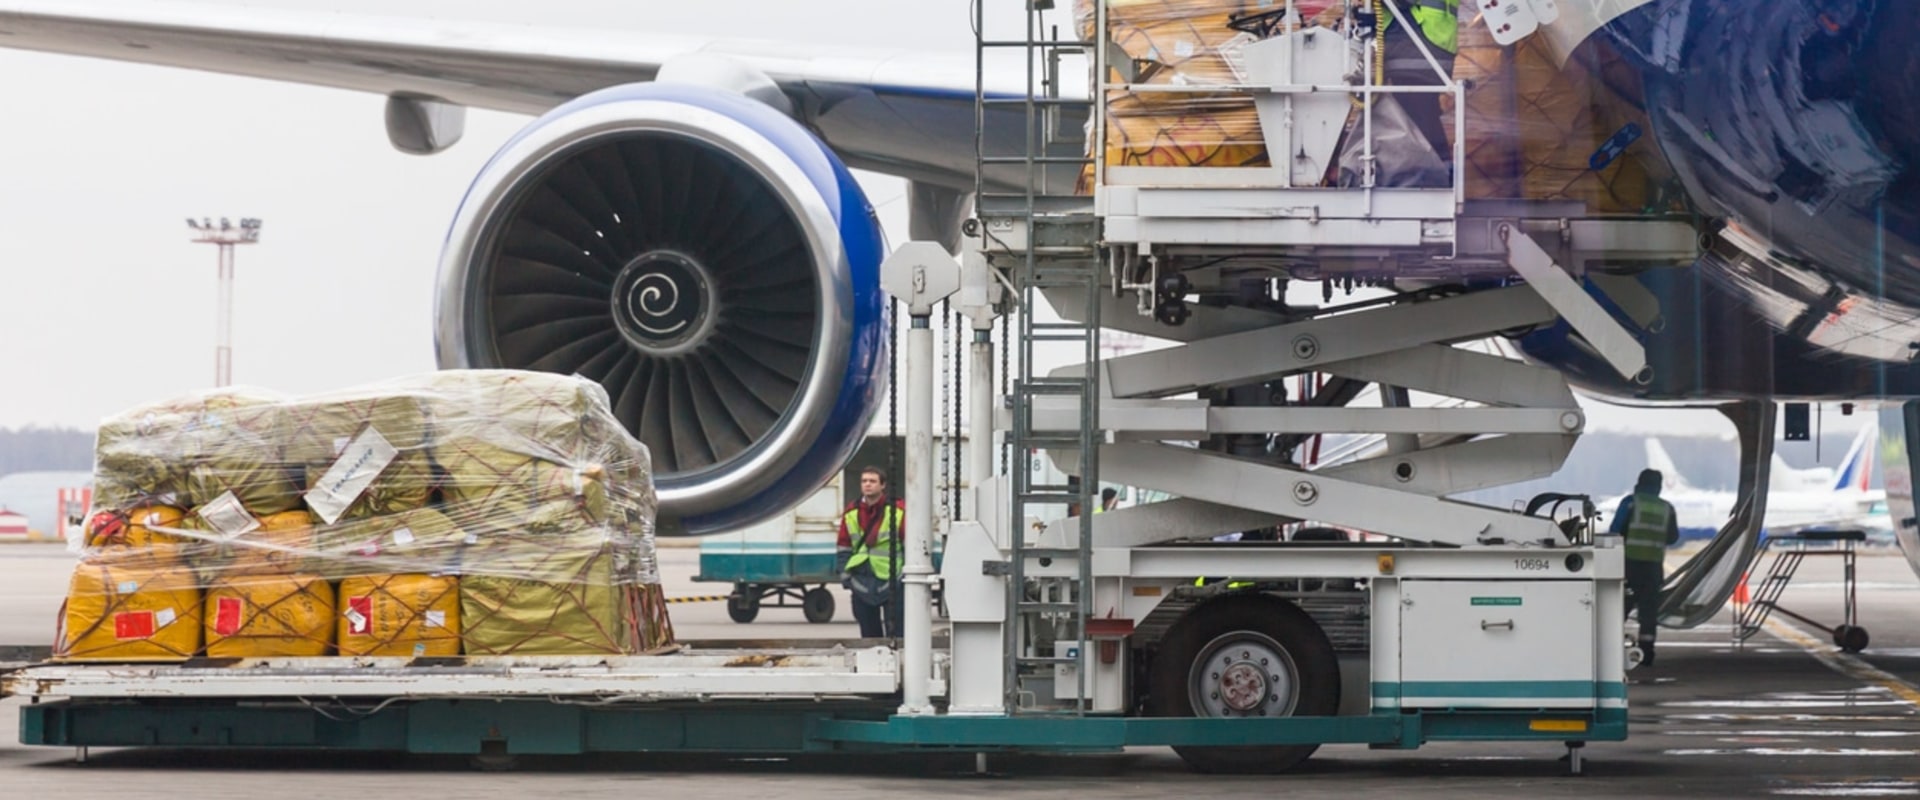 Consolidated Air Cargo Services: All You Need to Know